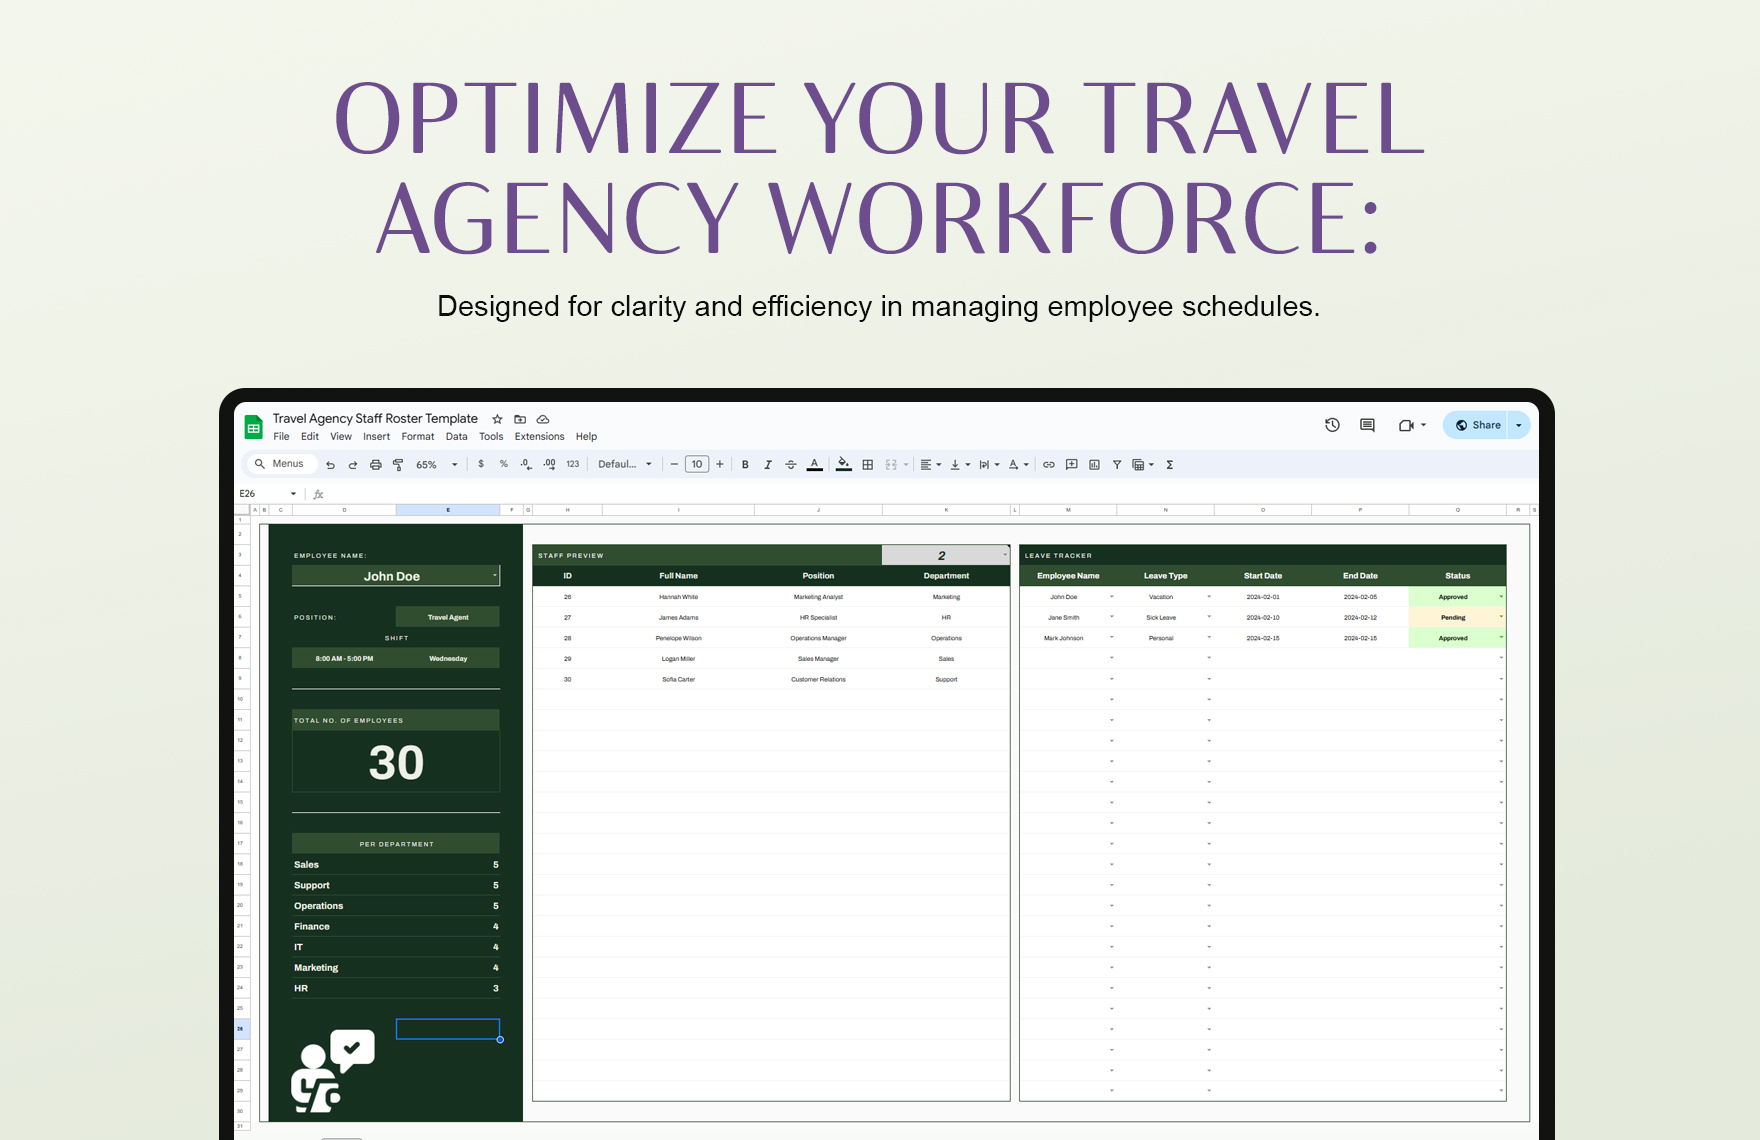 Travel Agency Staff Roster Template